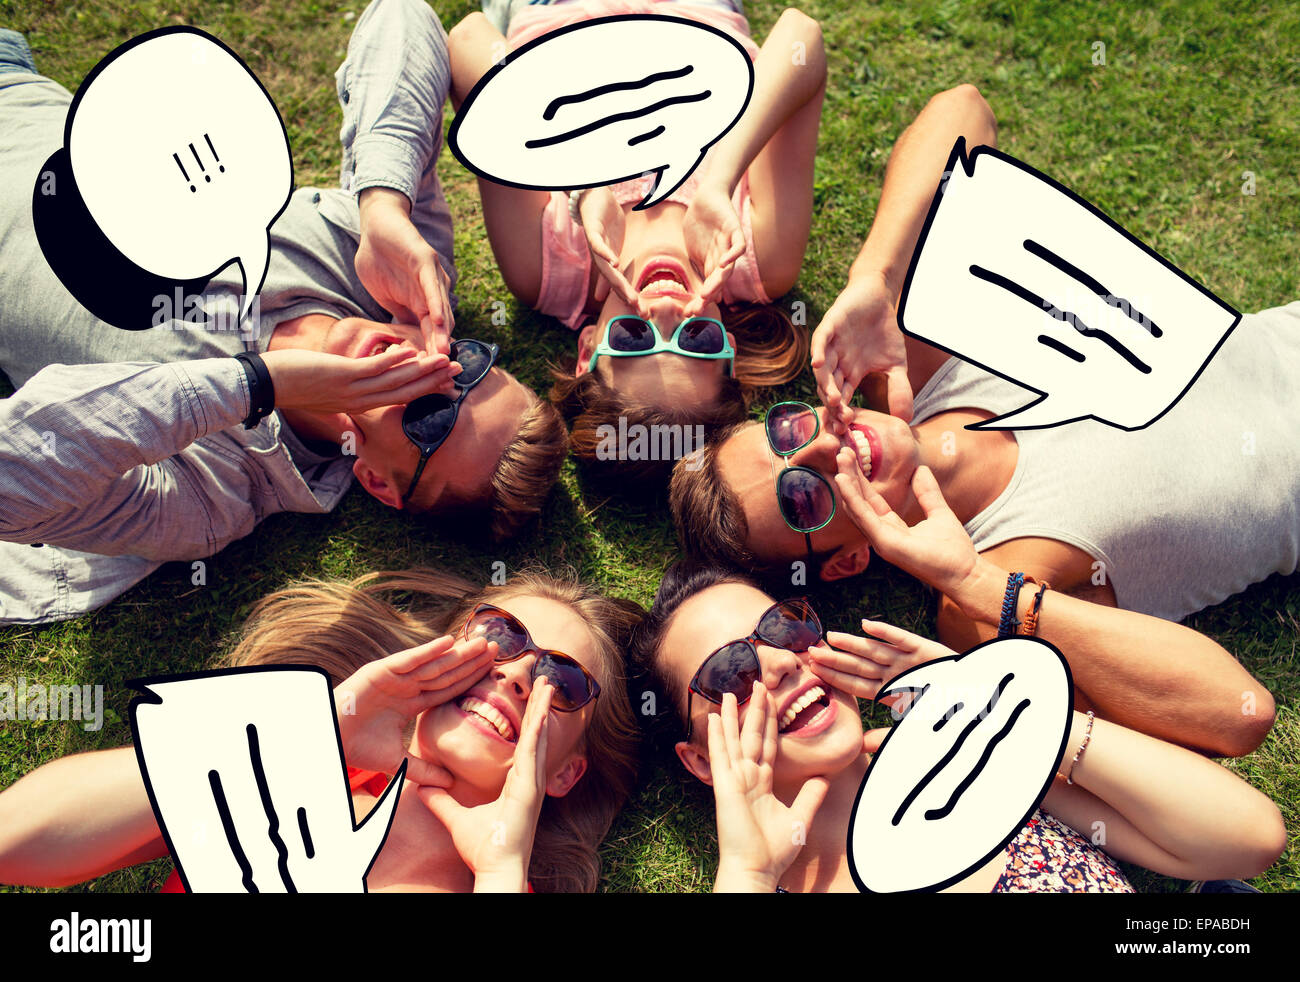 group of smiling friends lying on grass outdoors Stock Photo